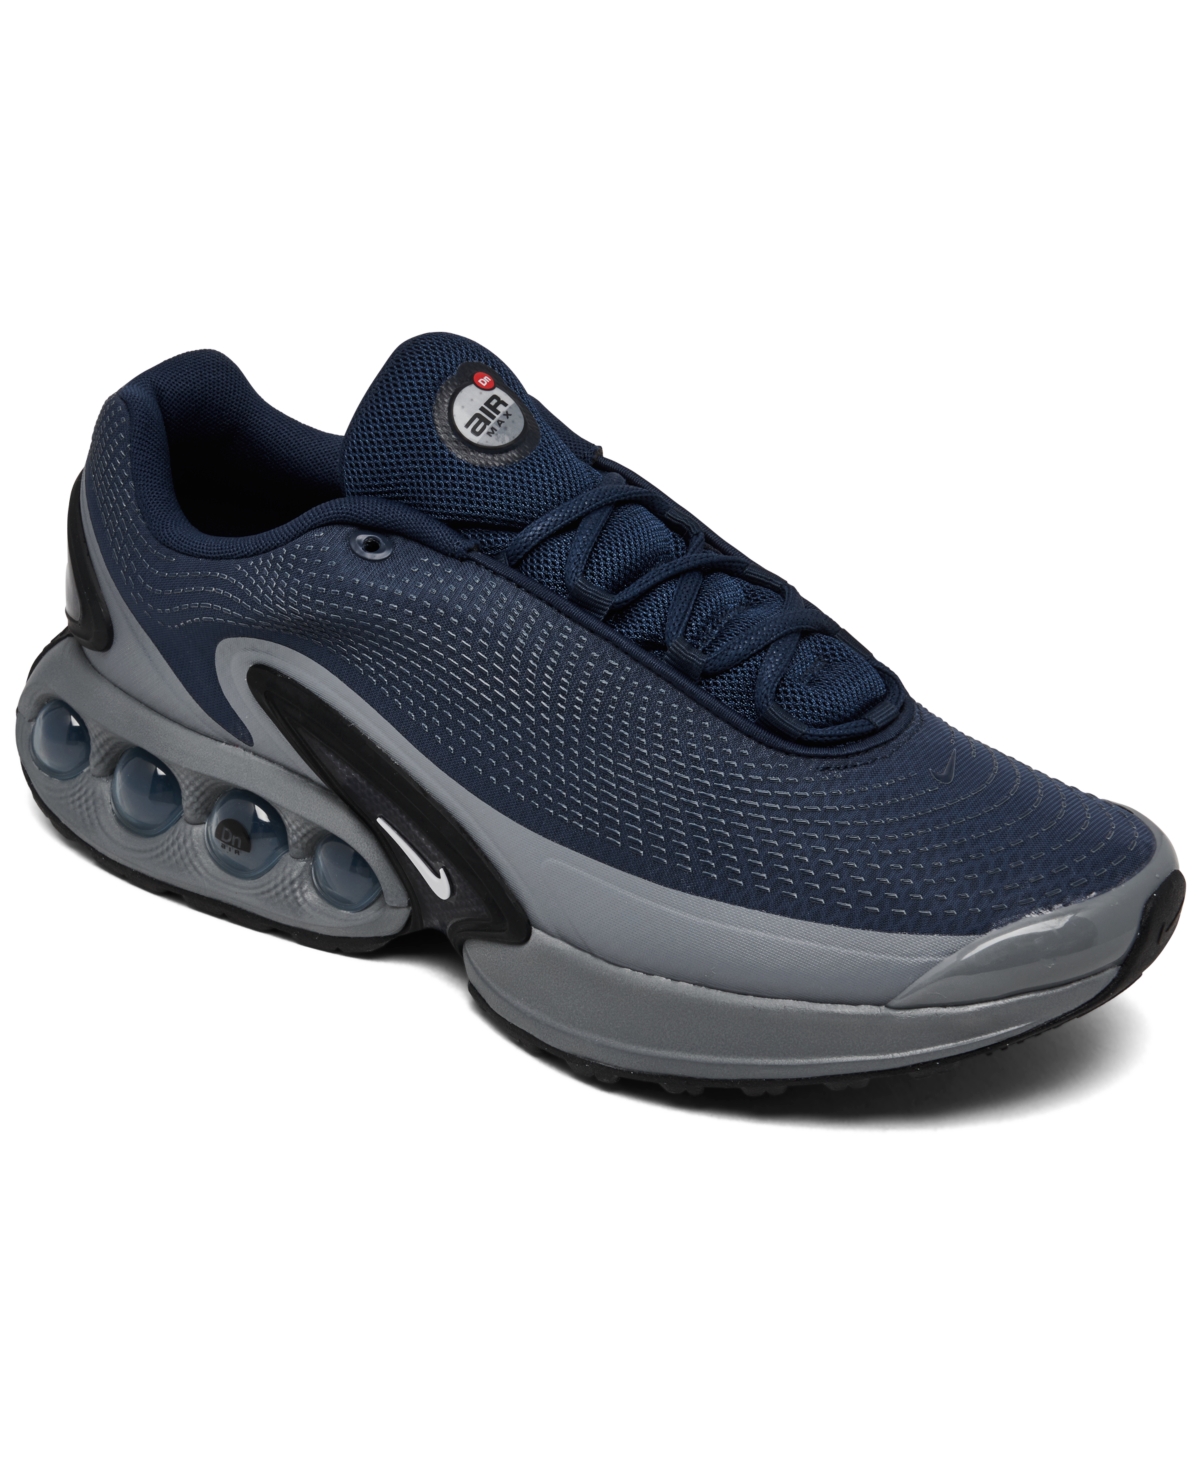 Men's Air Max Dn Casual Sneakers from Finish Line - Navy/White